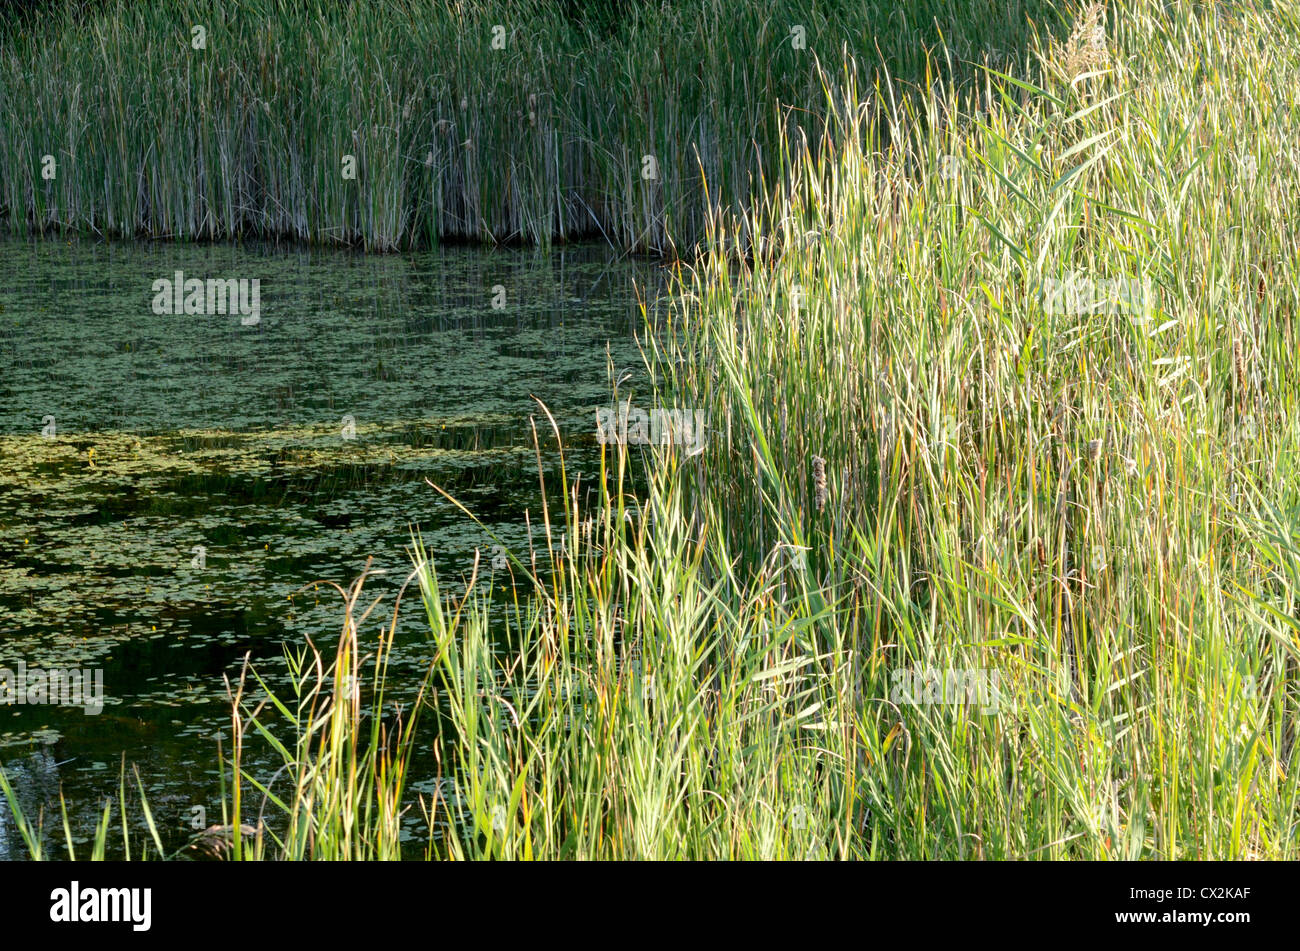 Pond grasses and water surface. Stock Photo